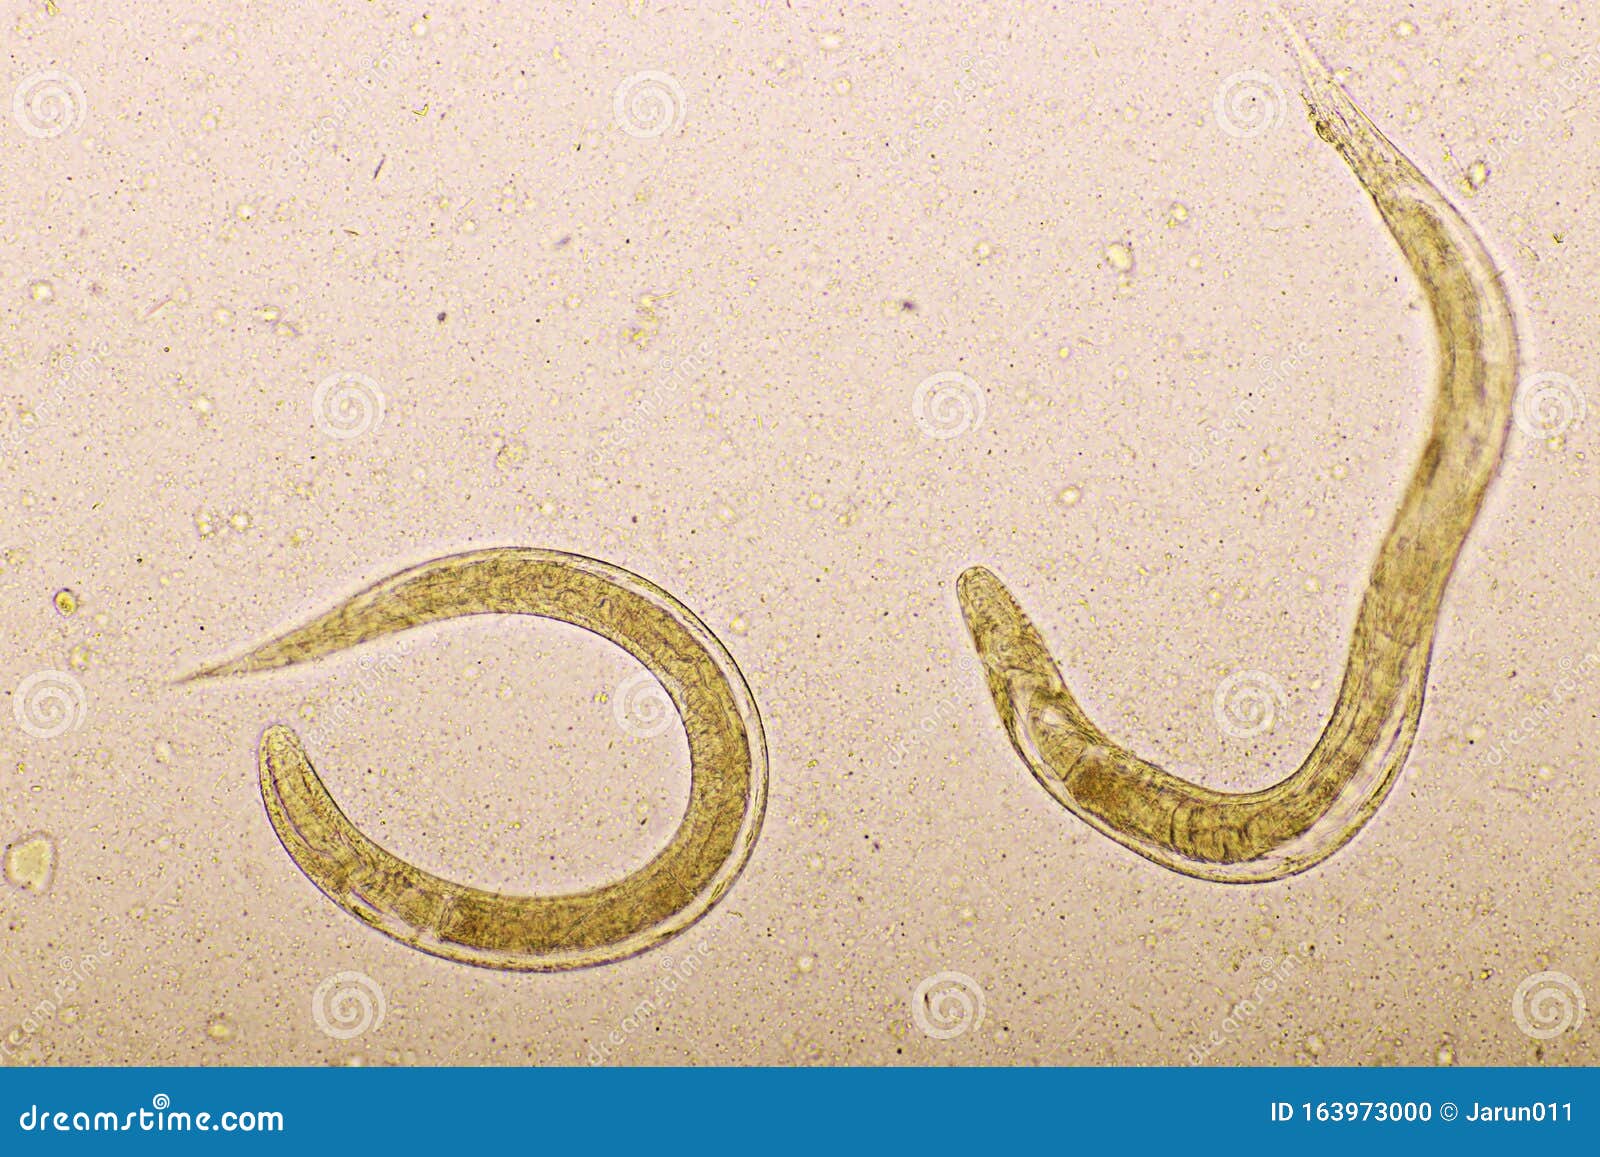 Strongyloides Stercoralis or Threadworm in Human Stool Stock Photo - Image  of analyzing, care: 163973000